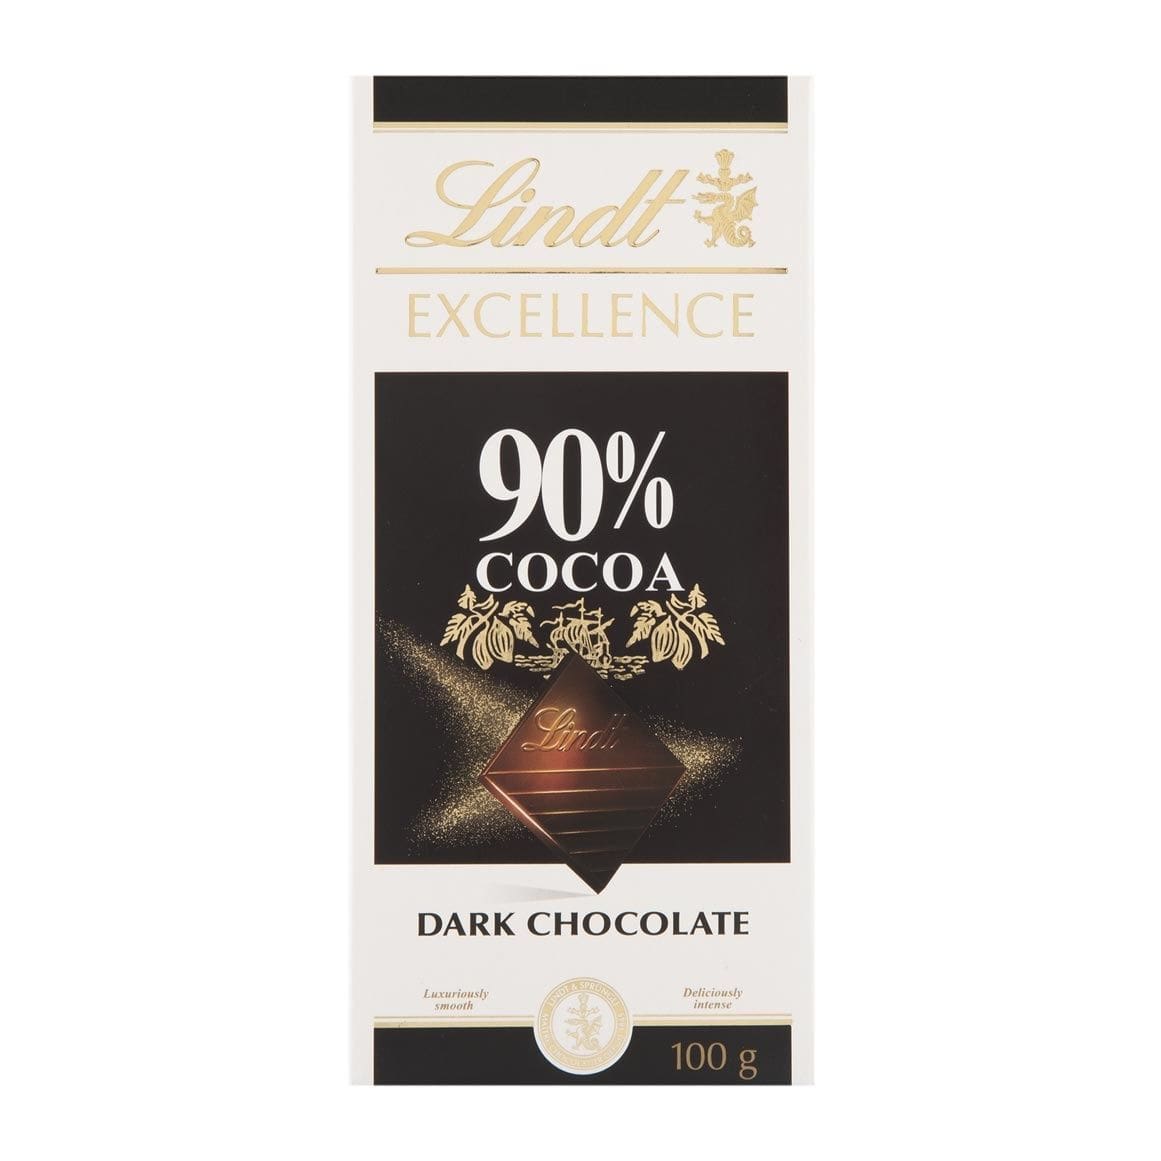 Lindt Household Lindt Excellence 90% Cocoa Dark Chocolate, 100g